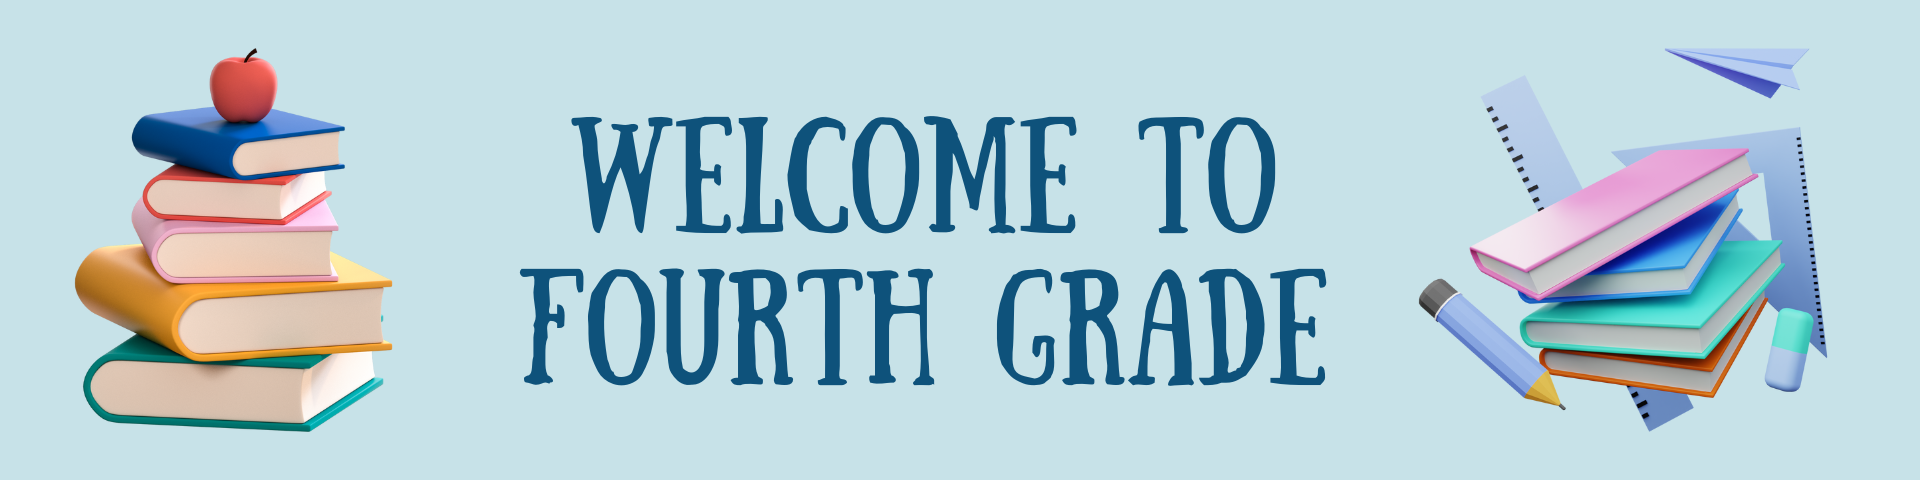 welcome to fourth grade banner